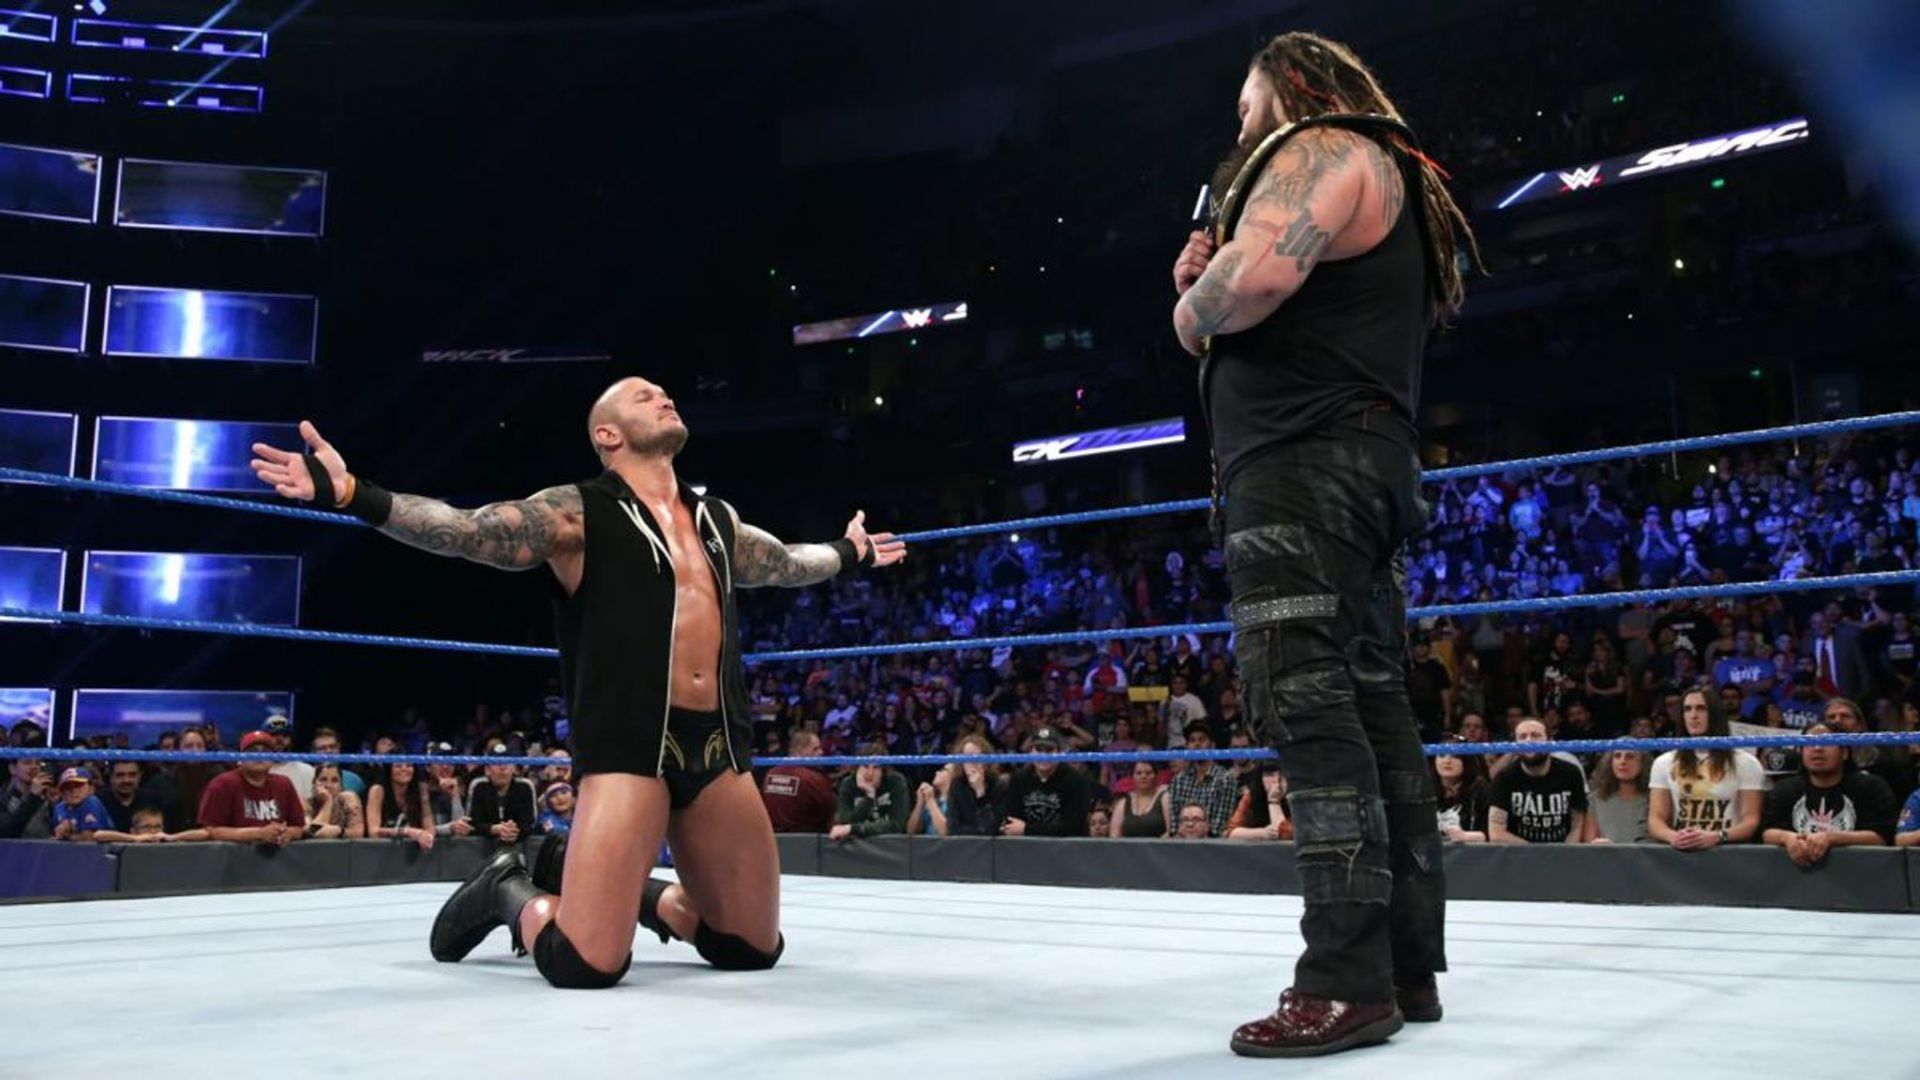 Randy Orton could get into another rivalry against Bray Wyatt.